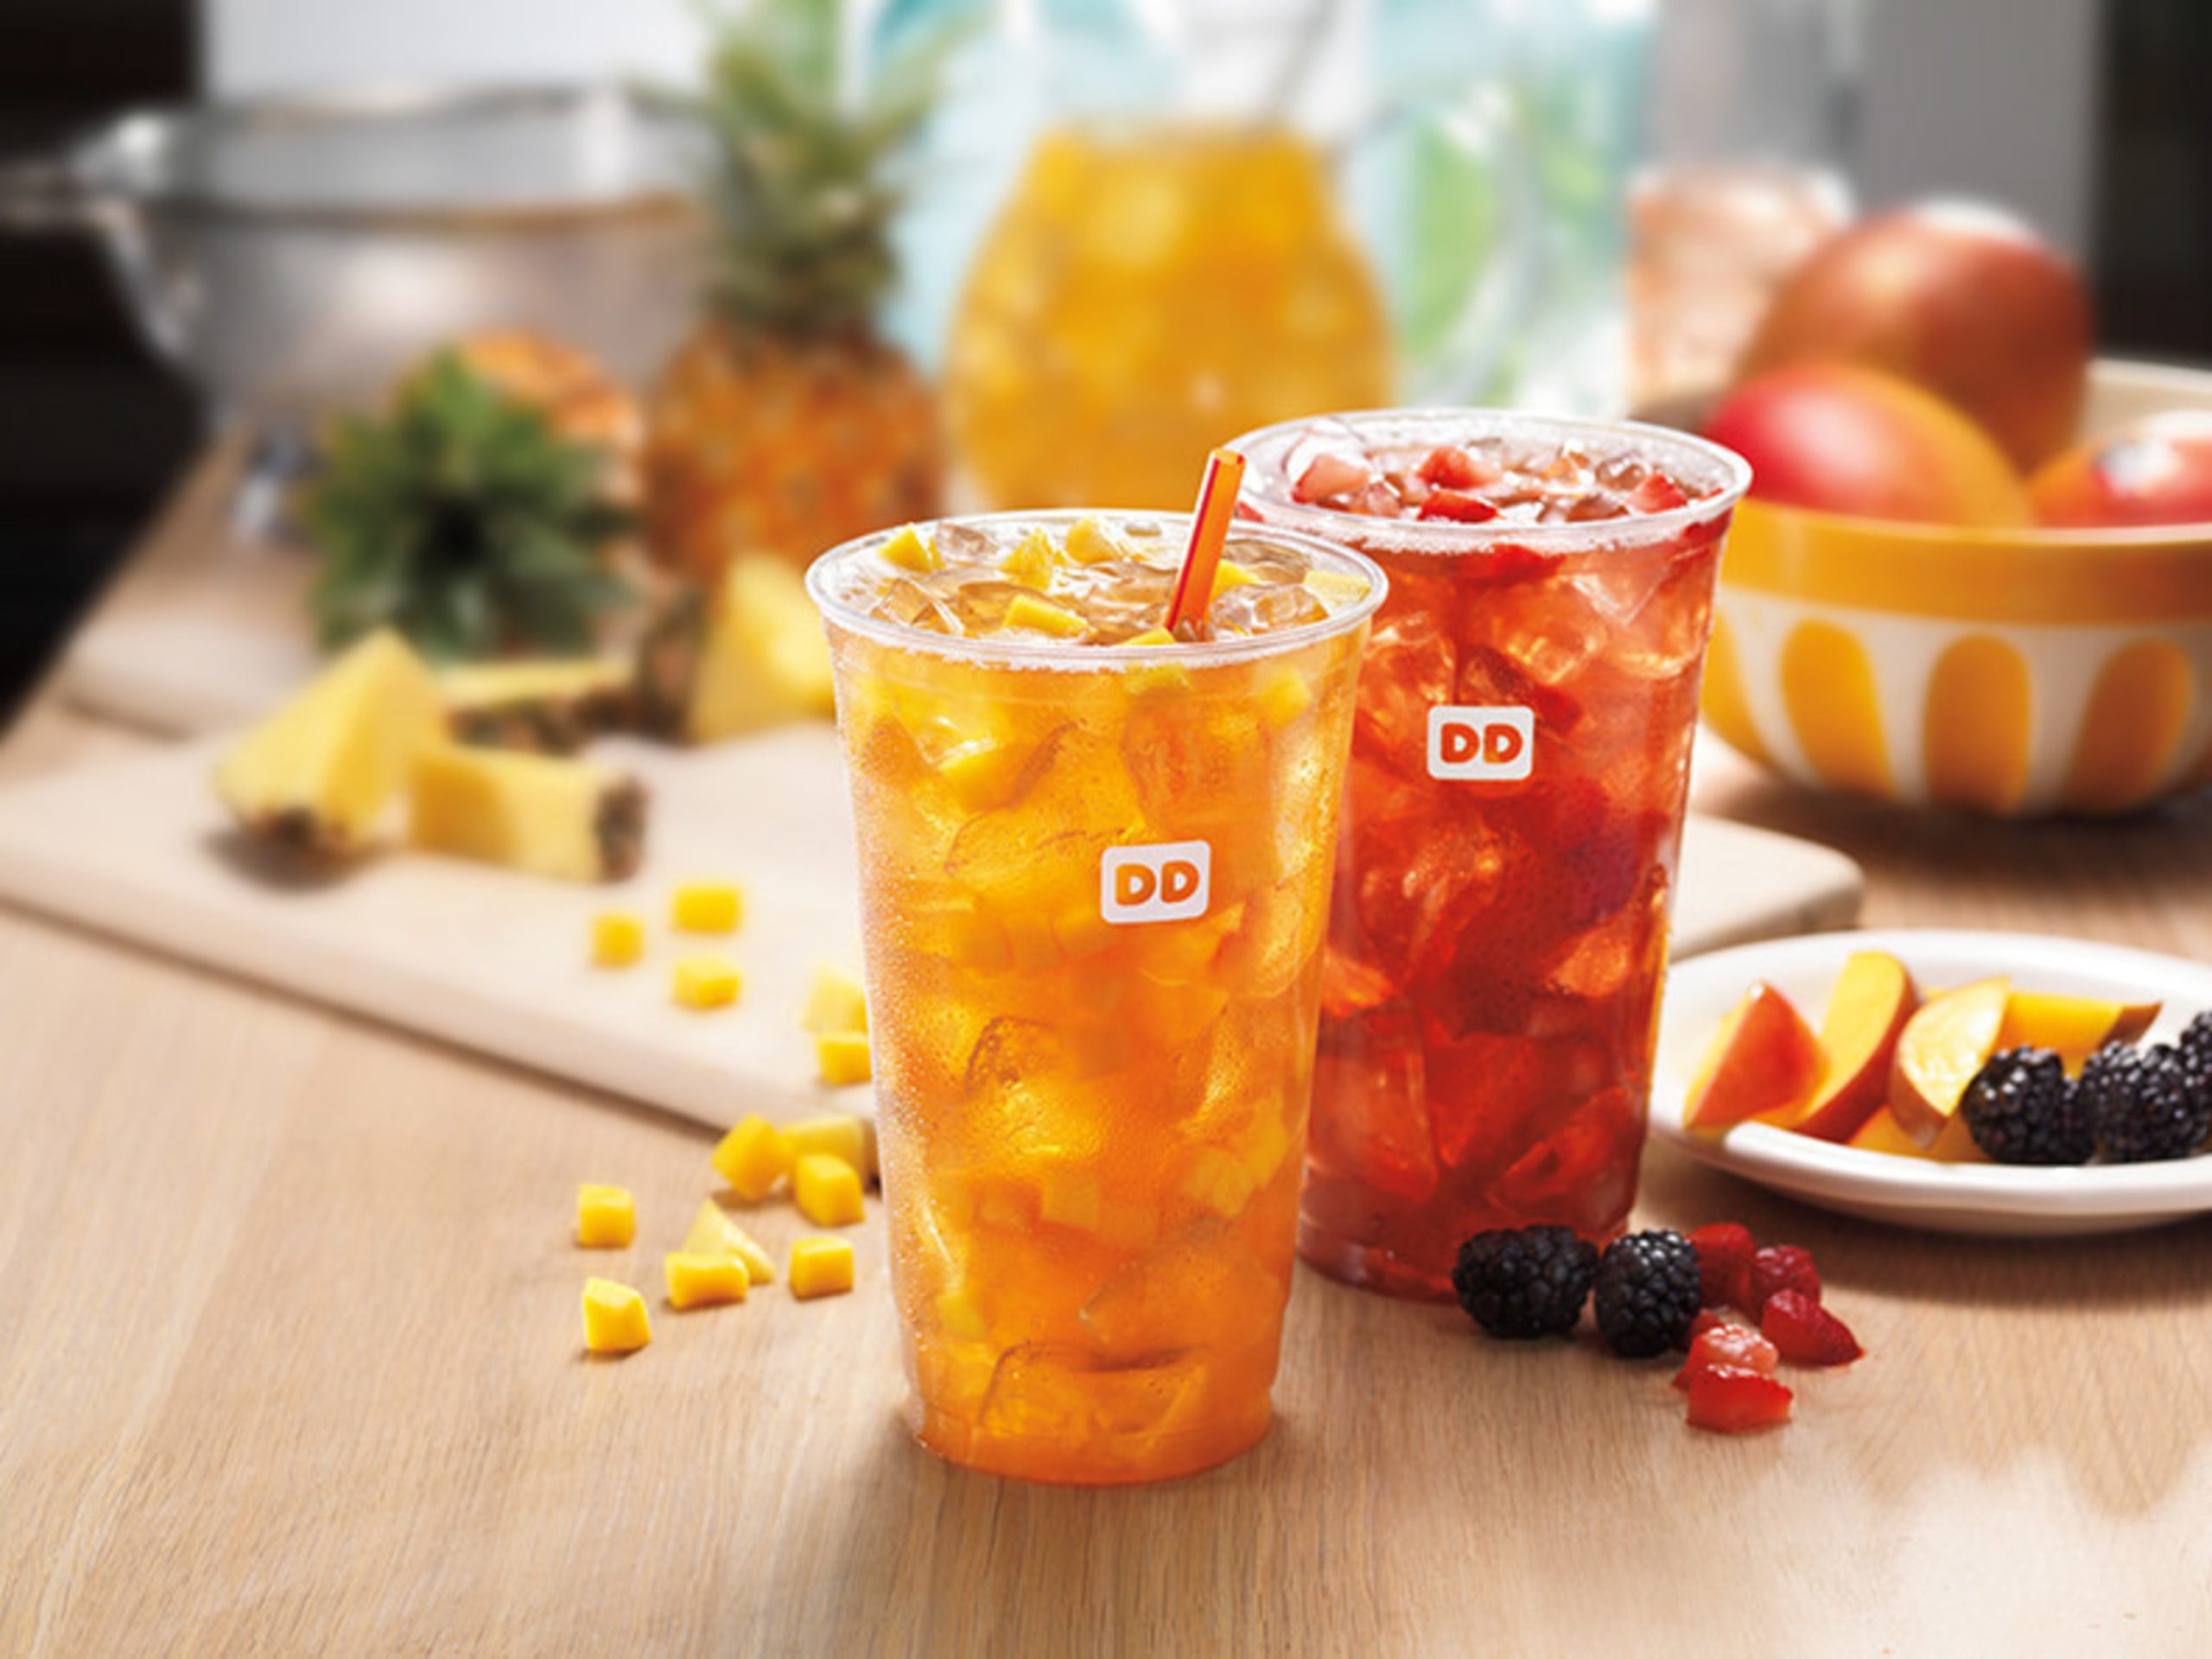 What is in a Dunkin Donuts Mango Pineapple Refresher